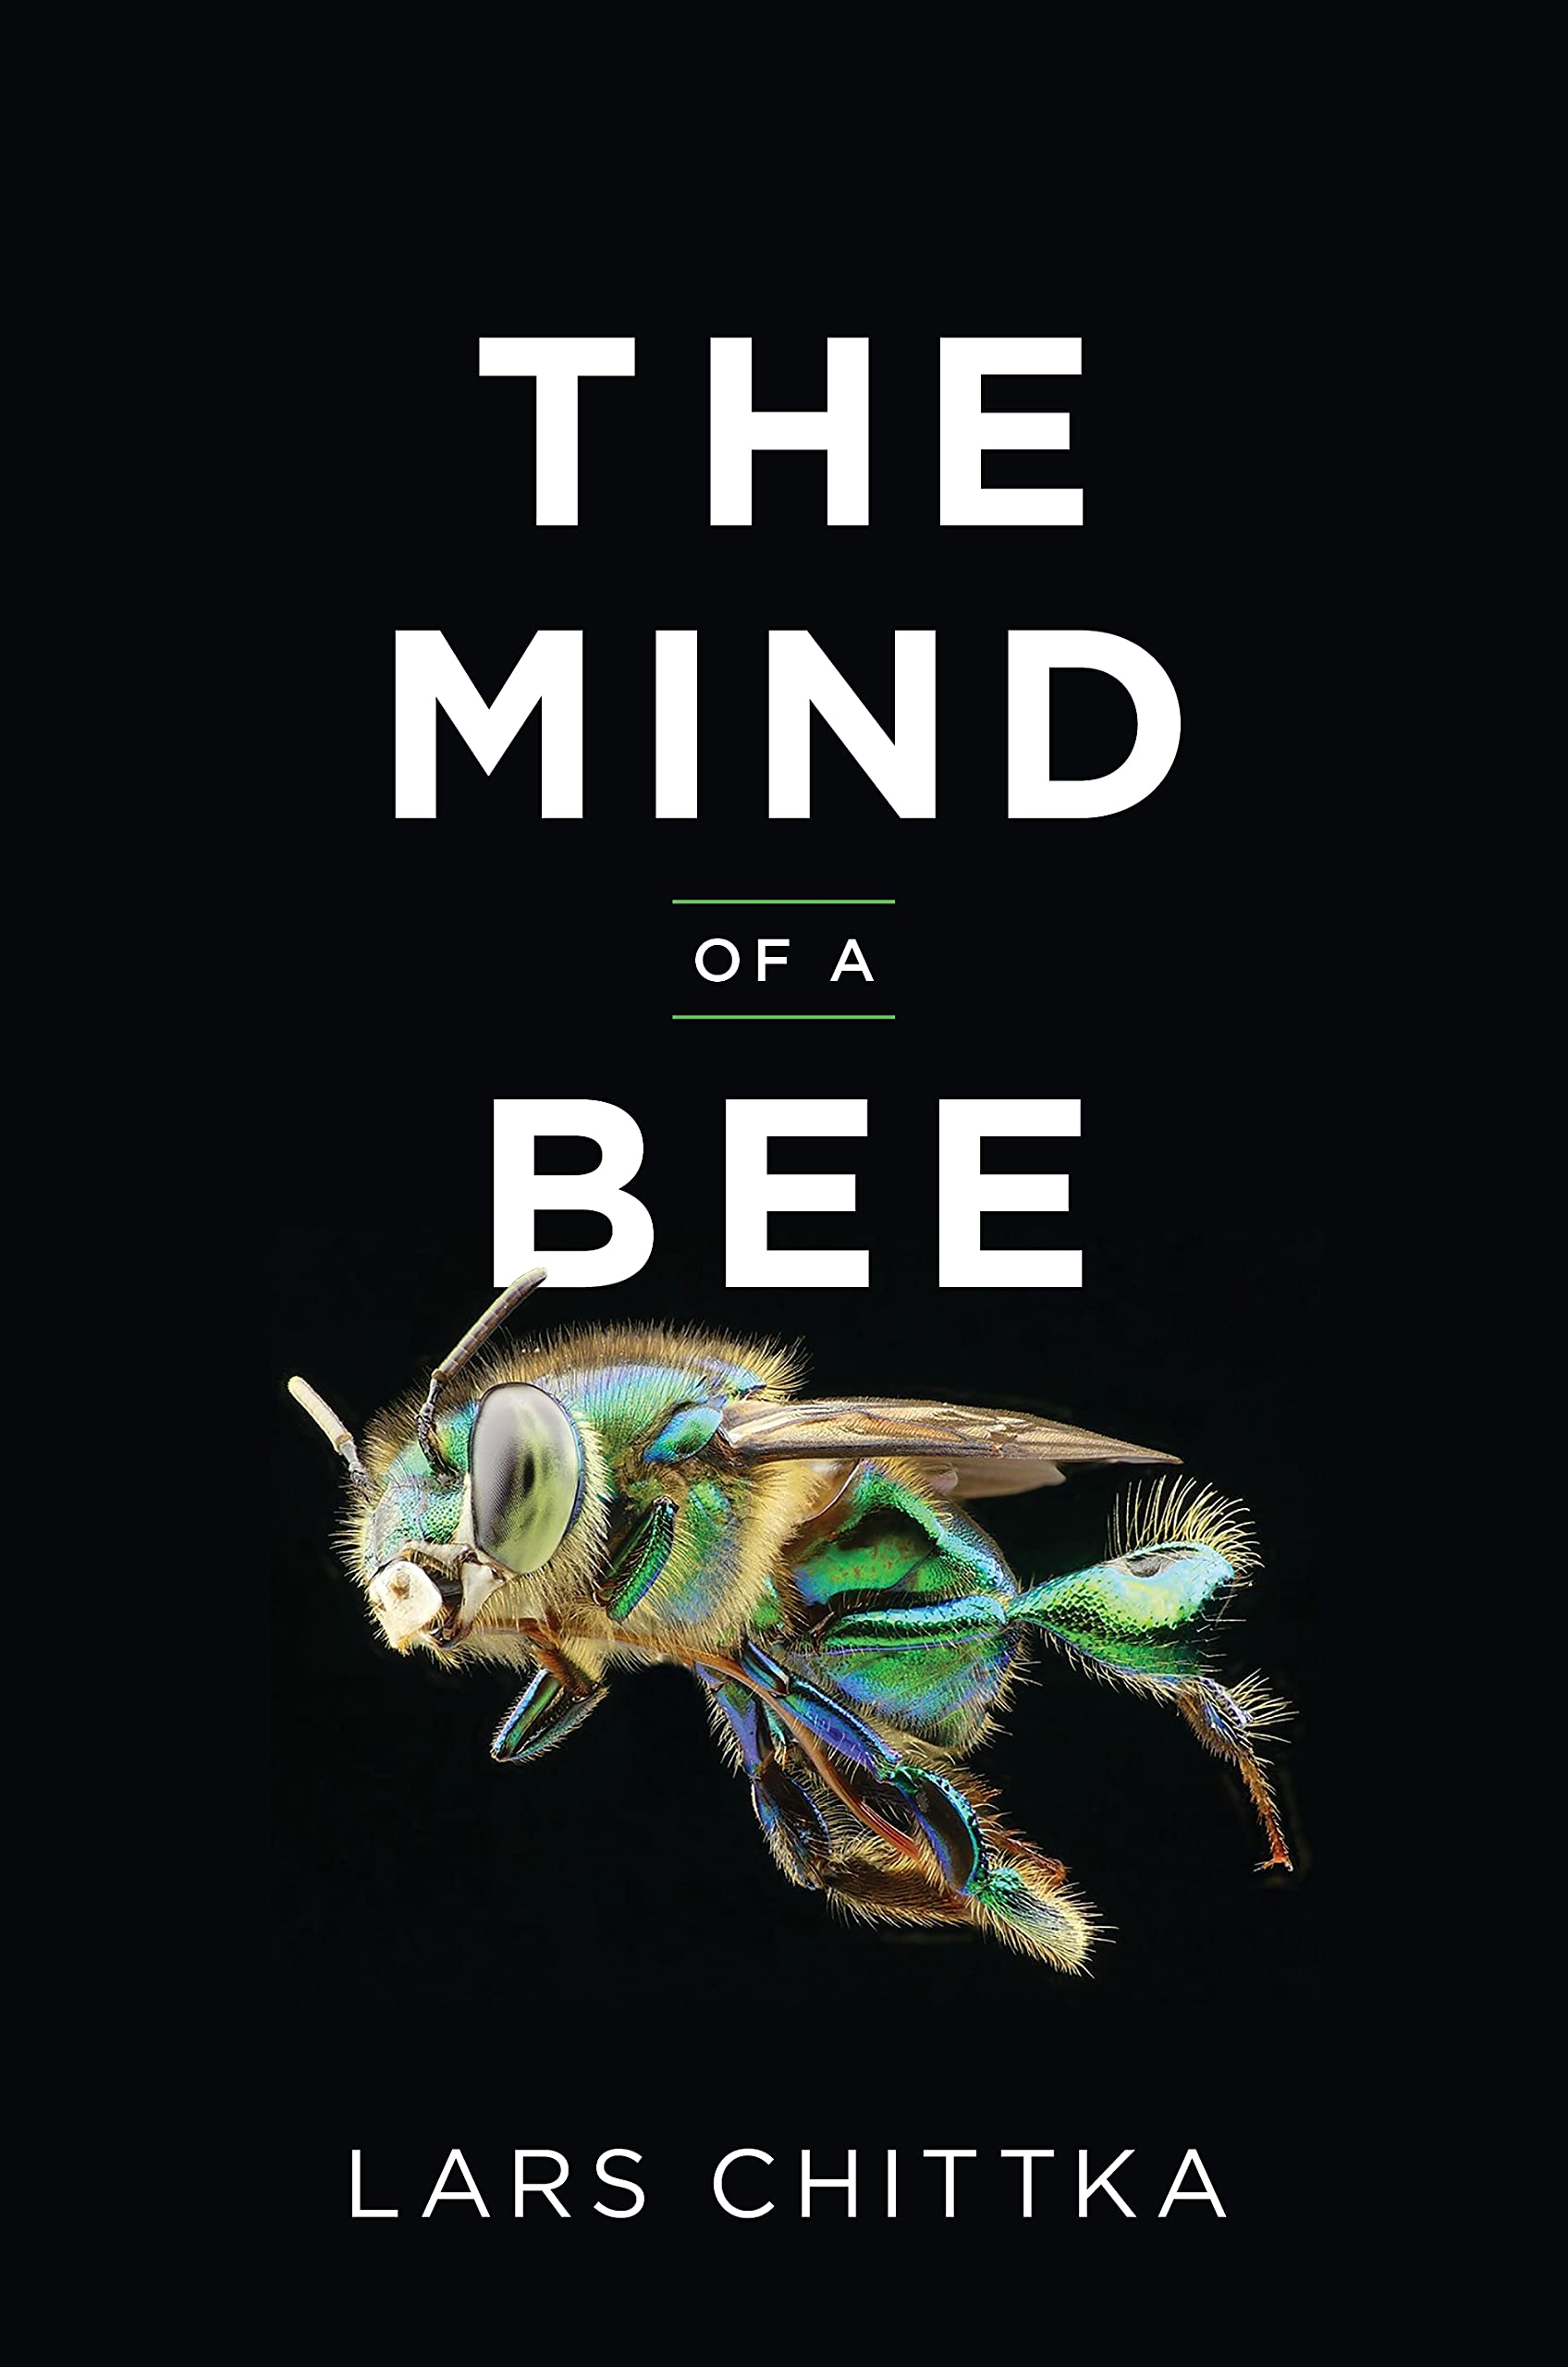 Image for "The Mind of a Bee"